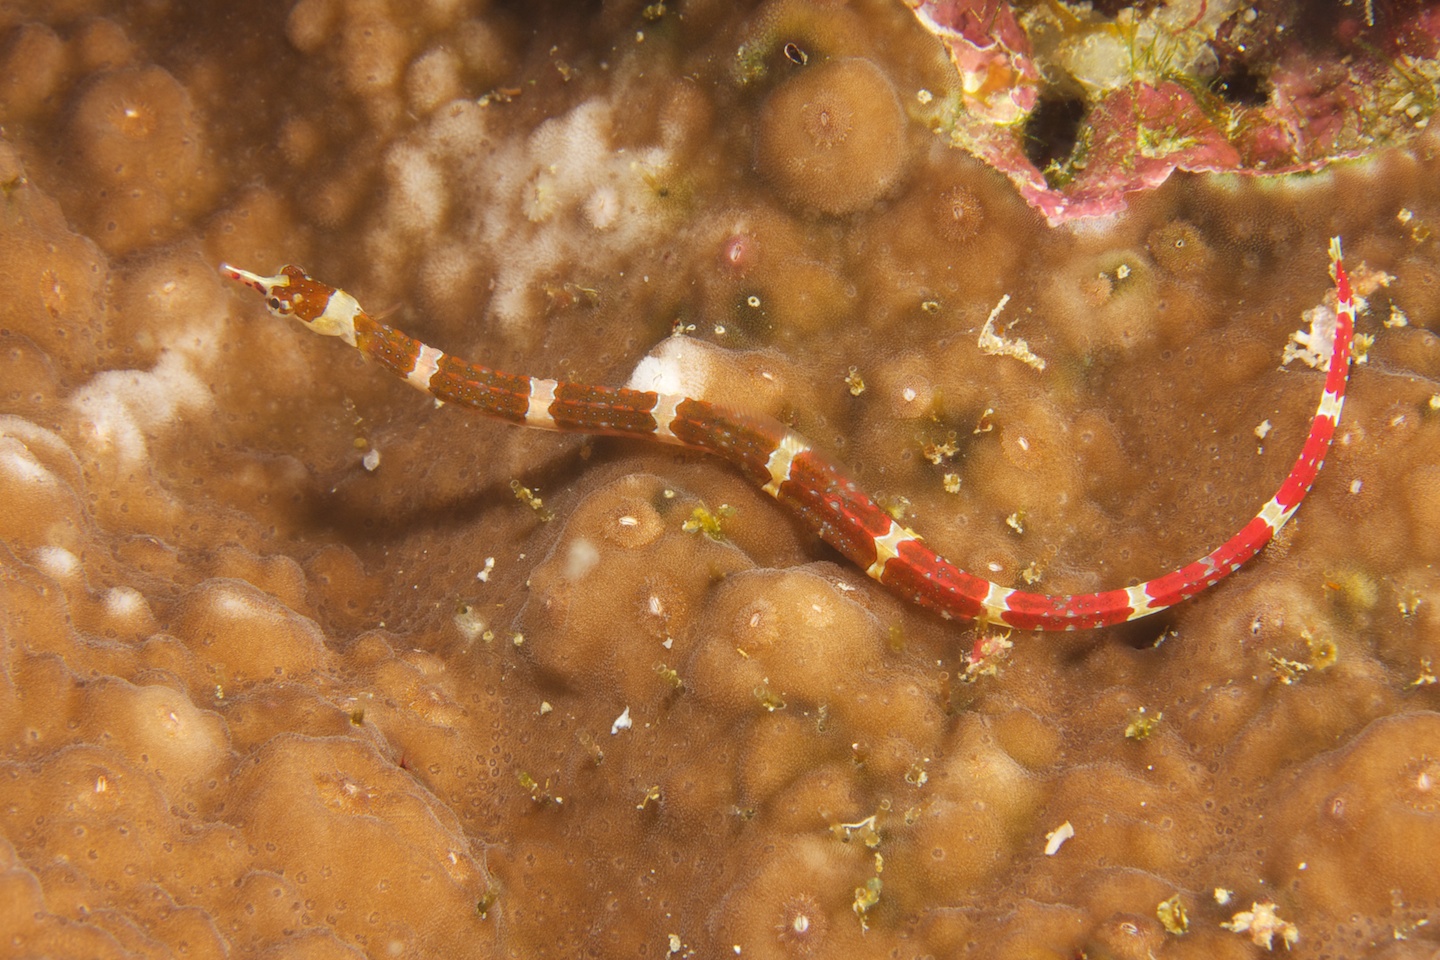 Brown-banded pipefish